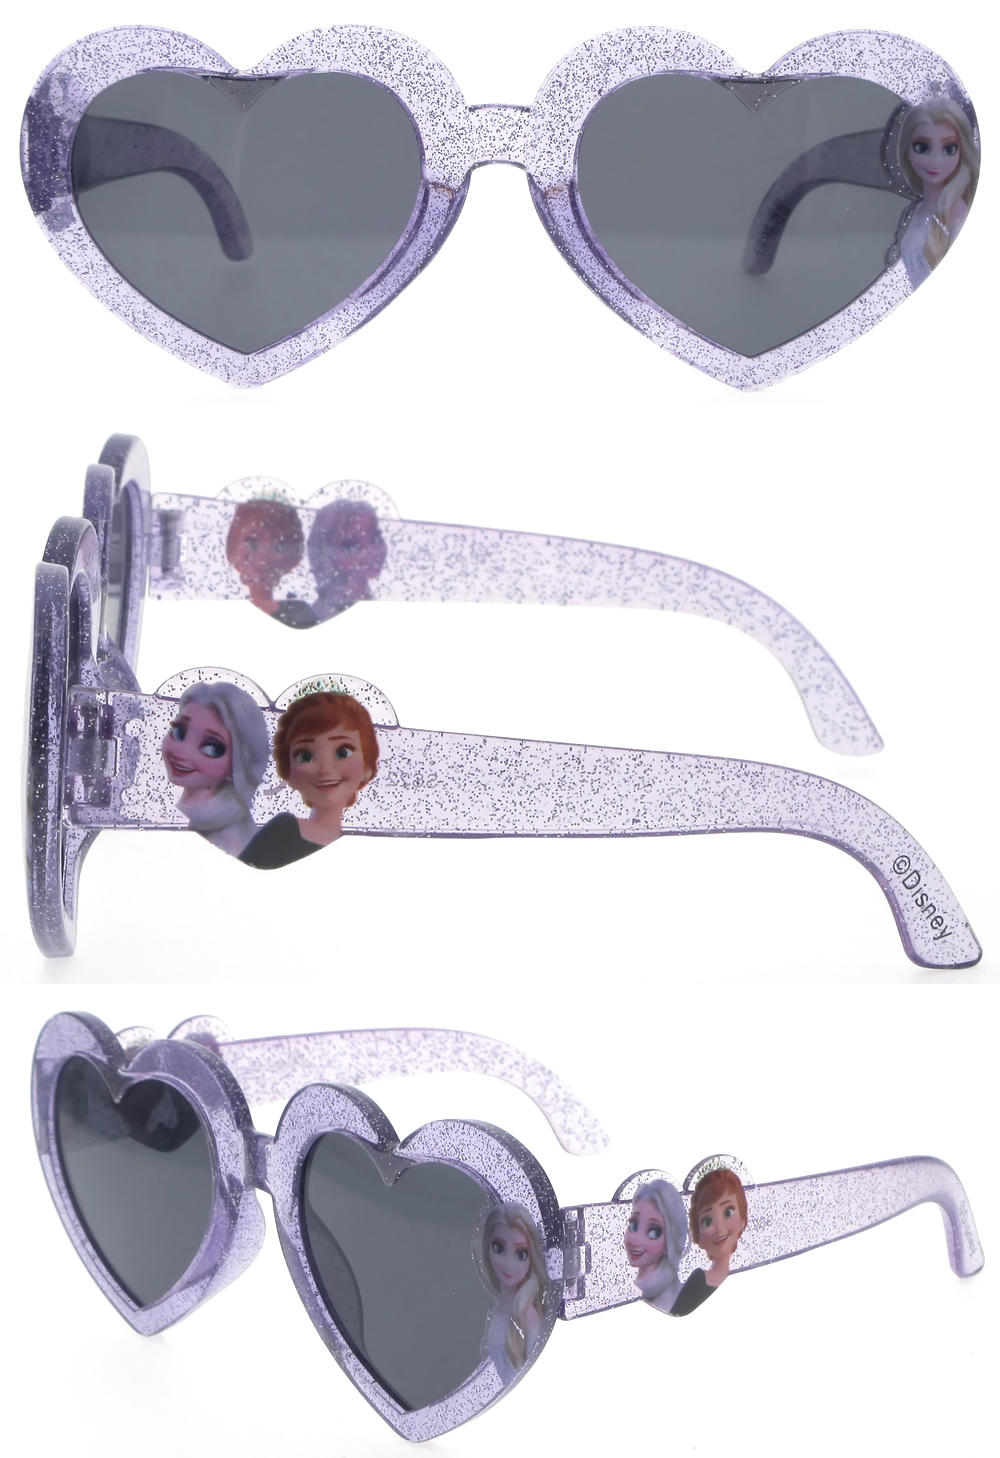 Dachuan Optical DSPK342041 China Manufacture Factory Lovely Cartoon Character Kids Sunglasses with Heart Shape (1)